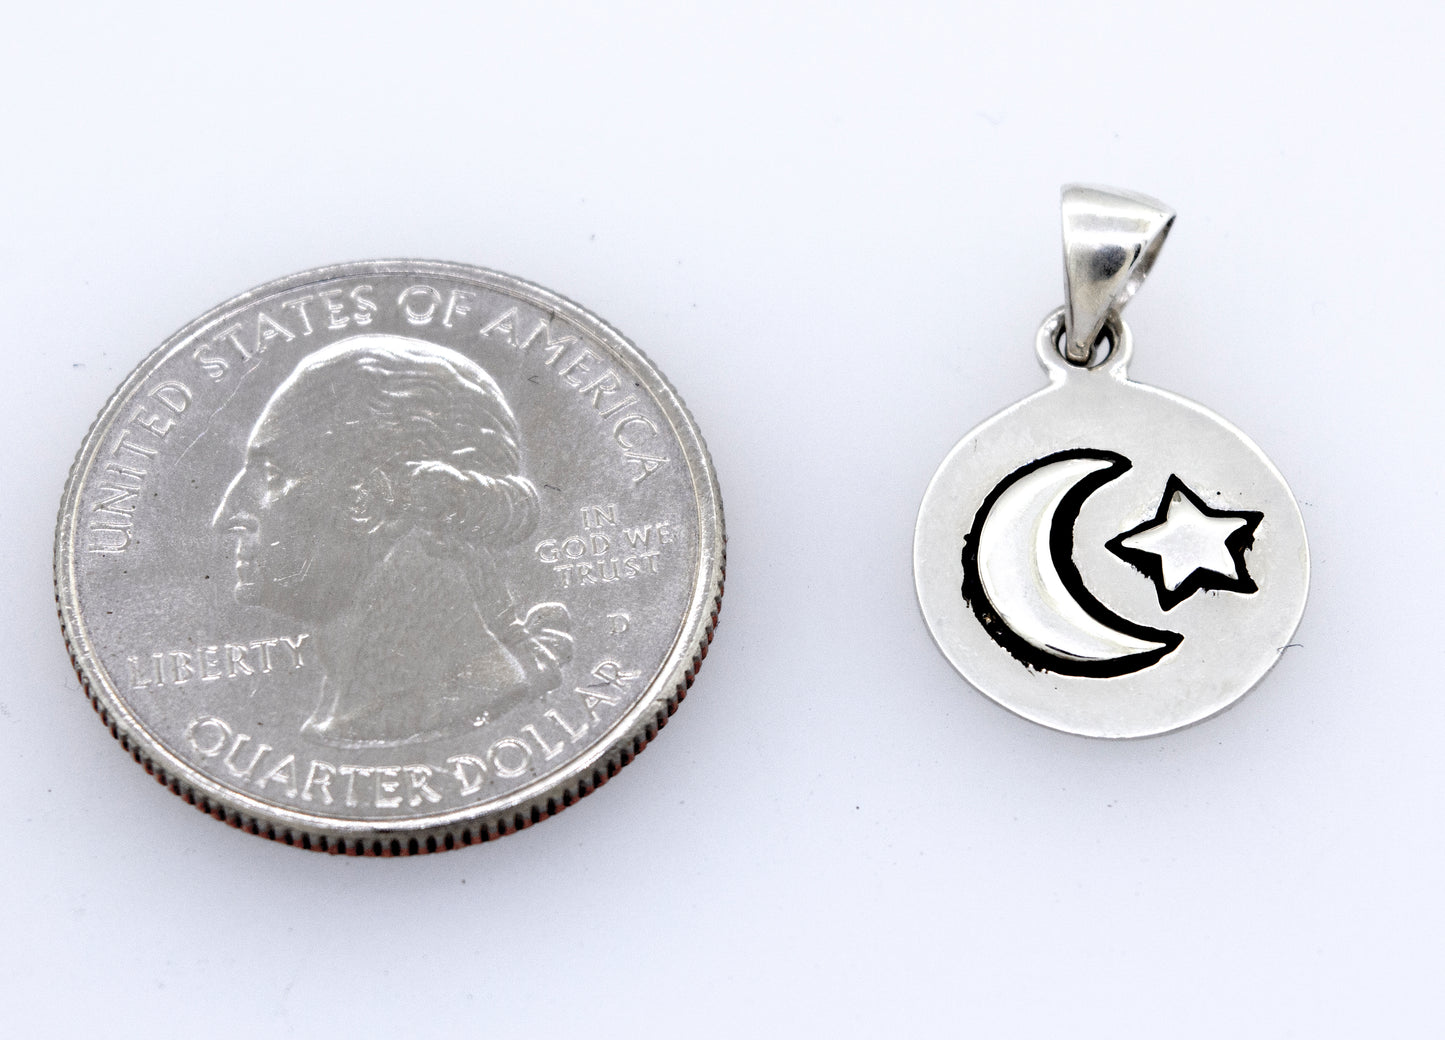 
                  
                    An interstellar Moon And Star Pendant featuring a silver crescent and star, complemented by an oxidized finish, placed next to a dime, made by Super Silver.
                  
                